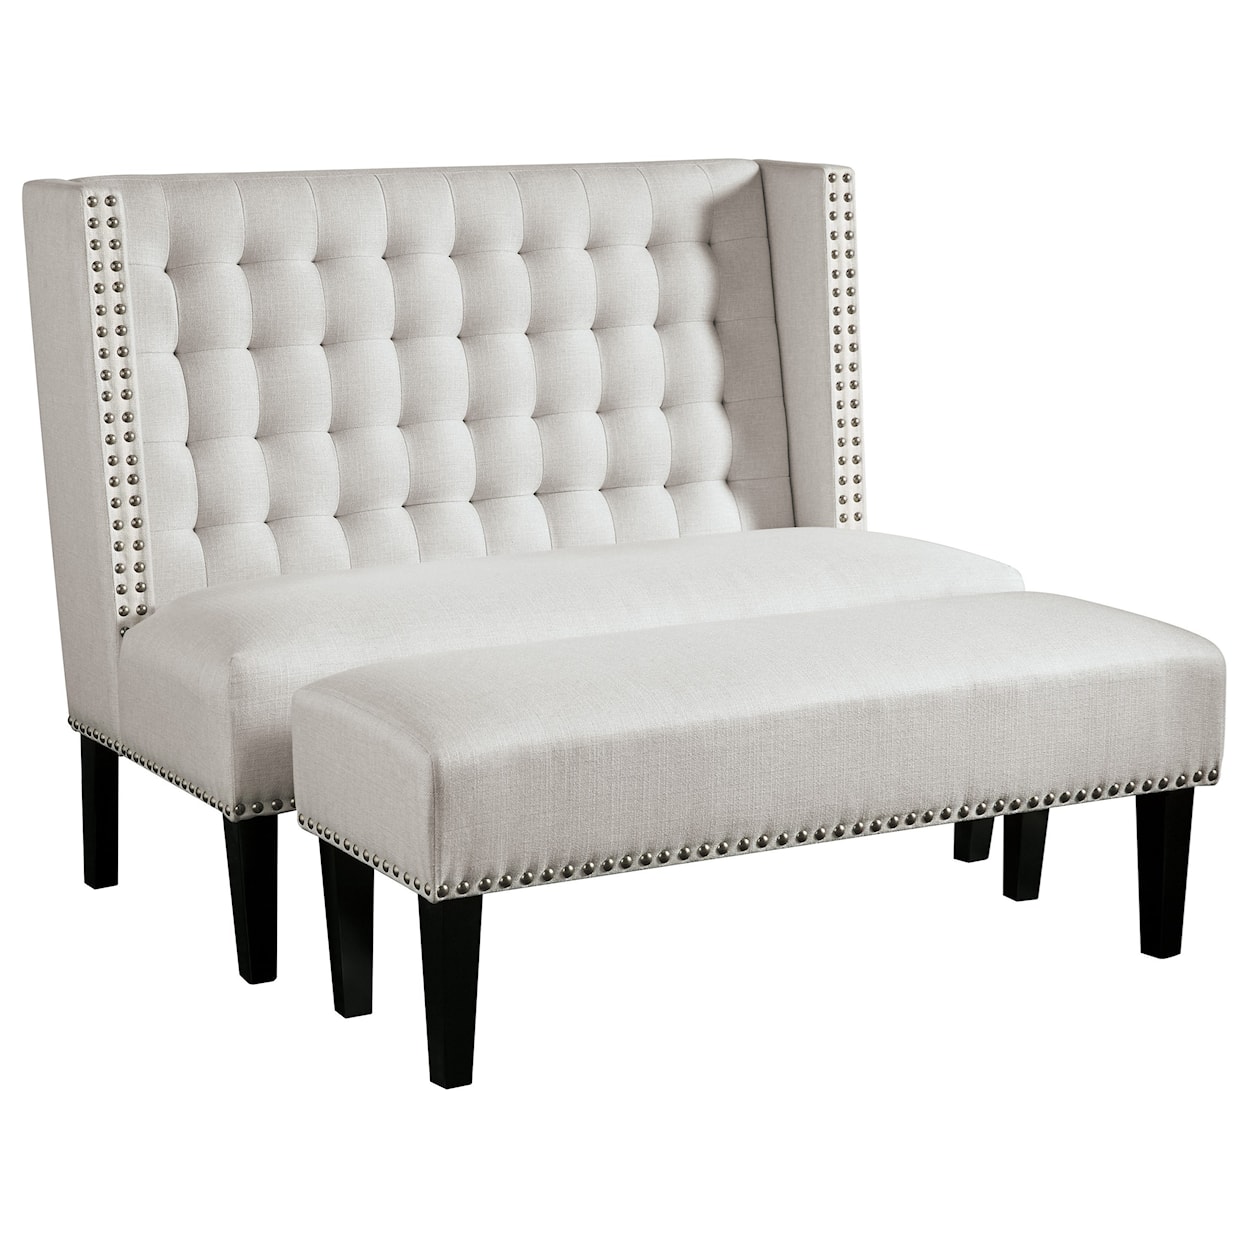 Signature Design by Ashley Beauland Settee and Bench